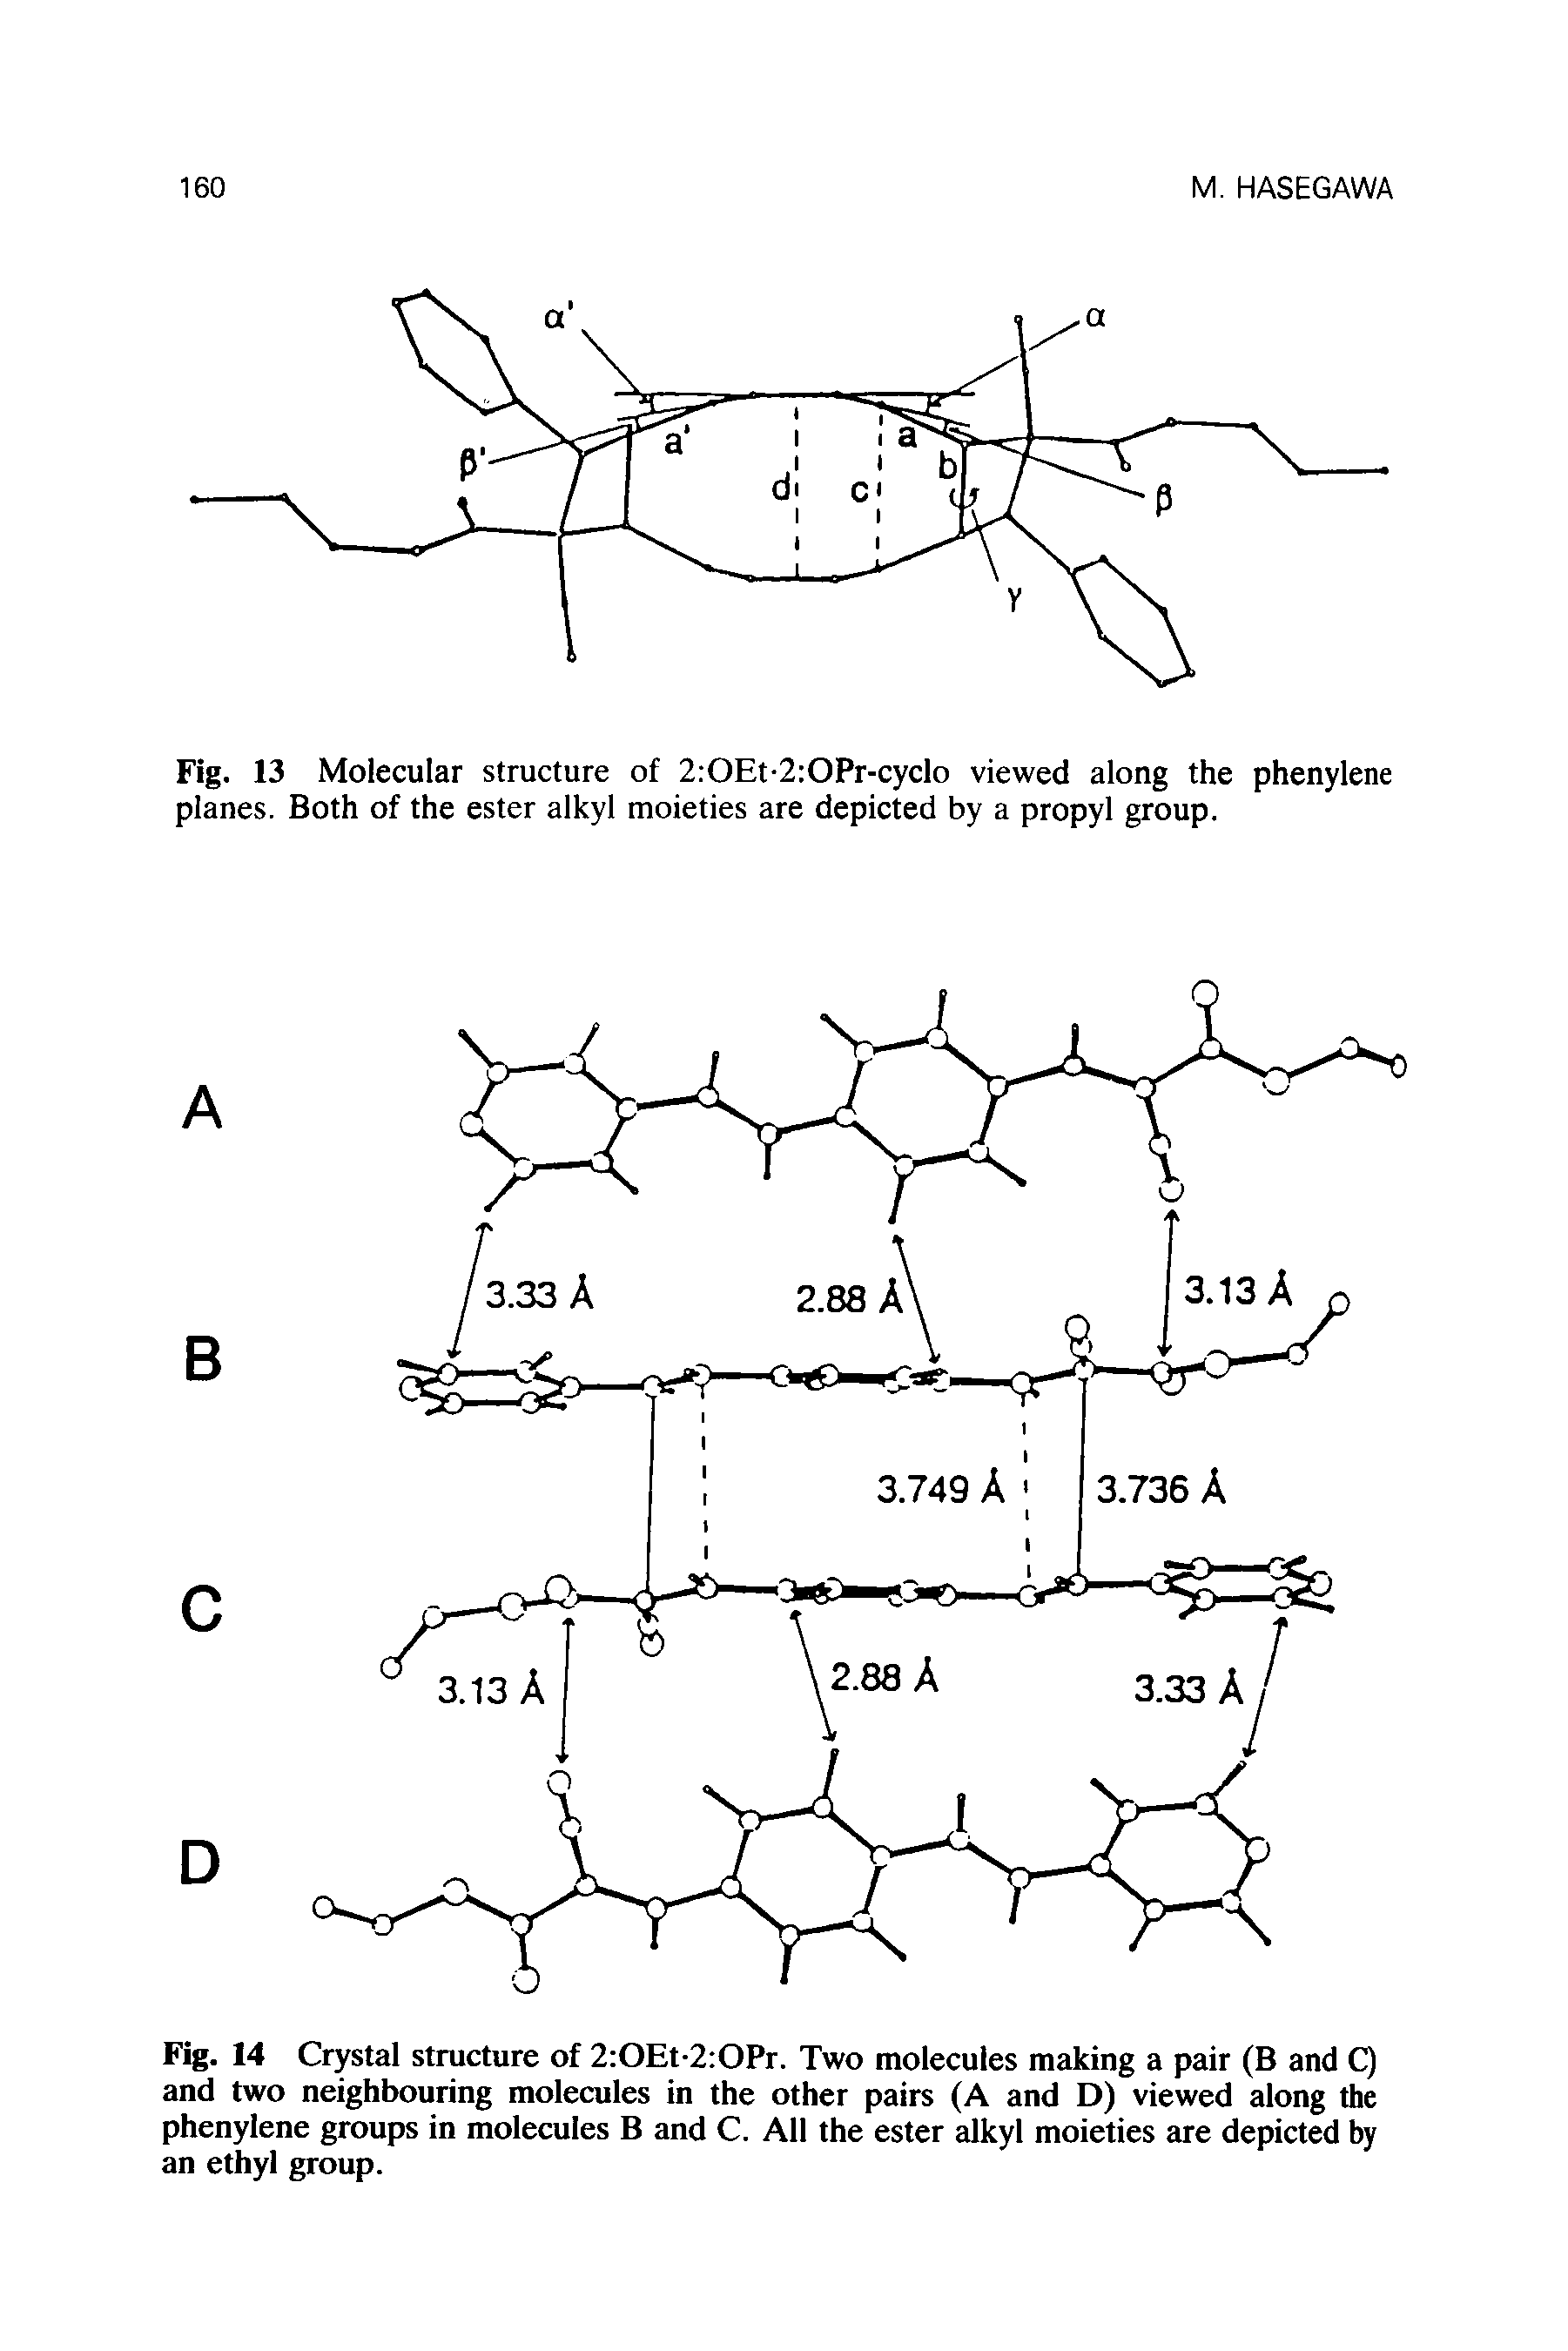 Fig. 14 Crystal structure of 2 OEt-2 OPr. Two molecules making a pair (B and C) and two neighbouring molecules in the other pairs (A and D) viewed along the phenylene groups in molecules B and C. All the ester alkyl moieties are depicted by an ethyl group.